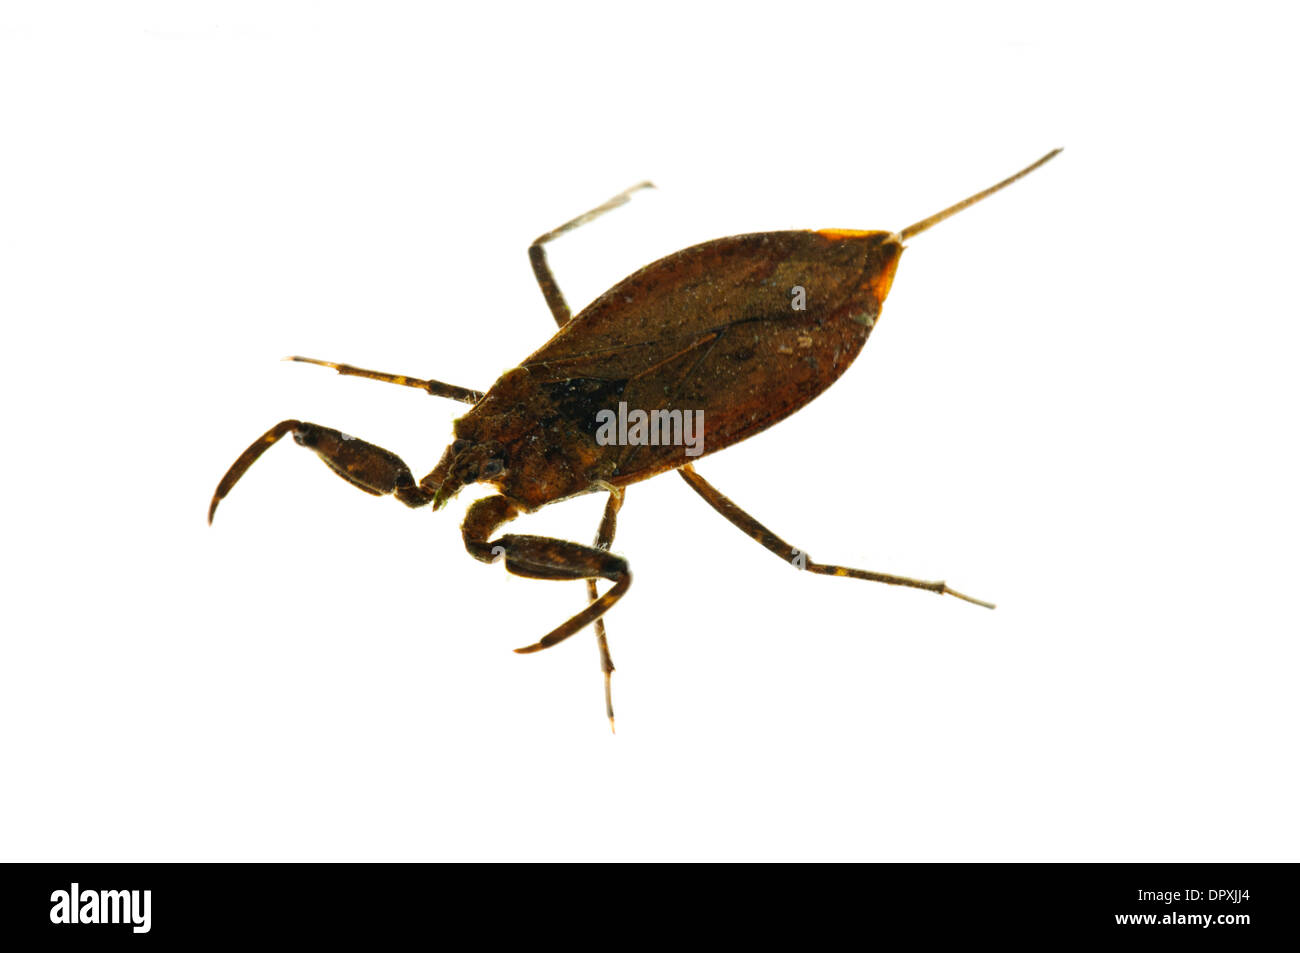 Water Scorpion (Nepa cinerea), adult photographed against a white background at Crossness Nature Reserve, Bexley, Kent. Stock Photo